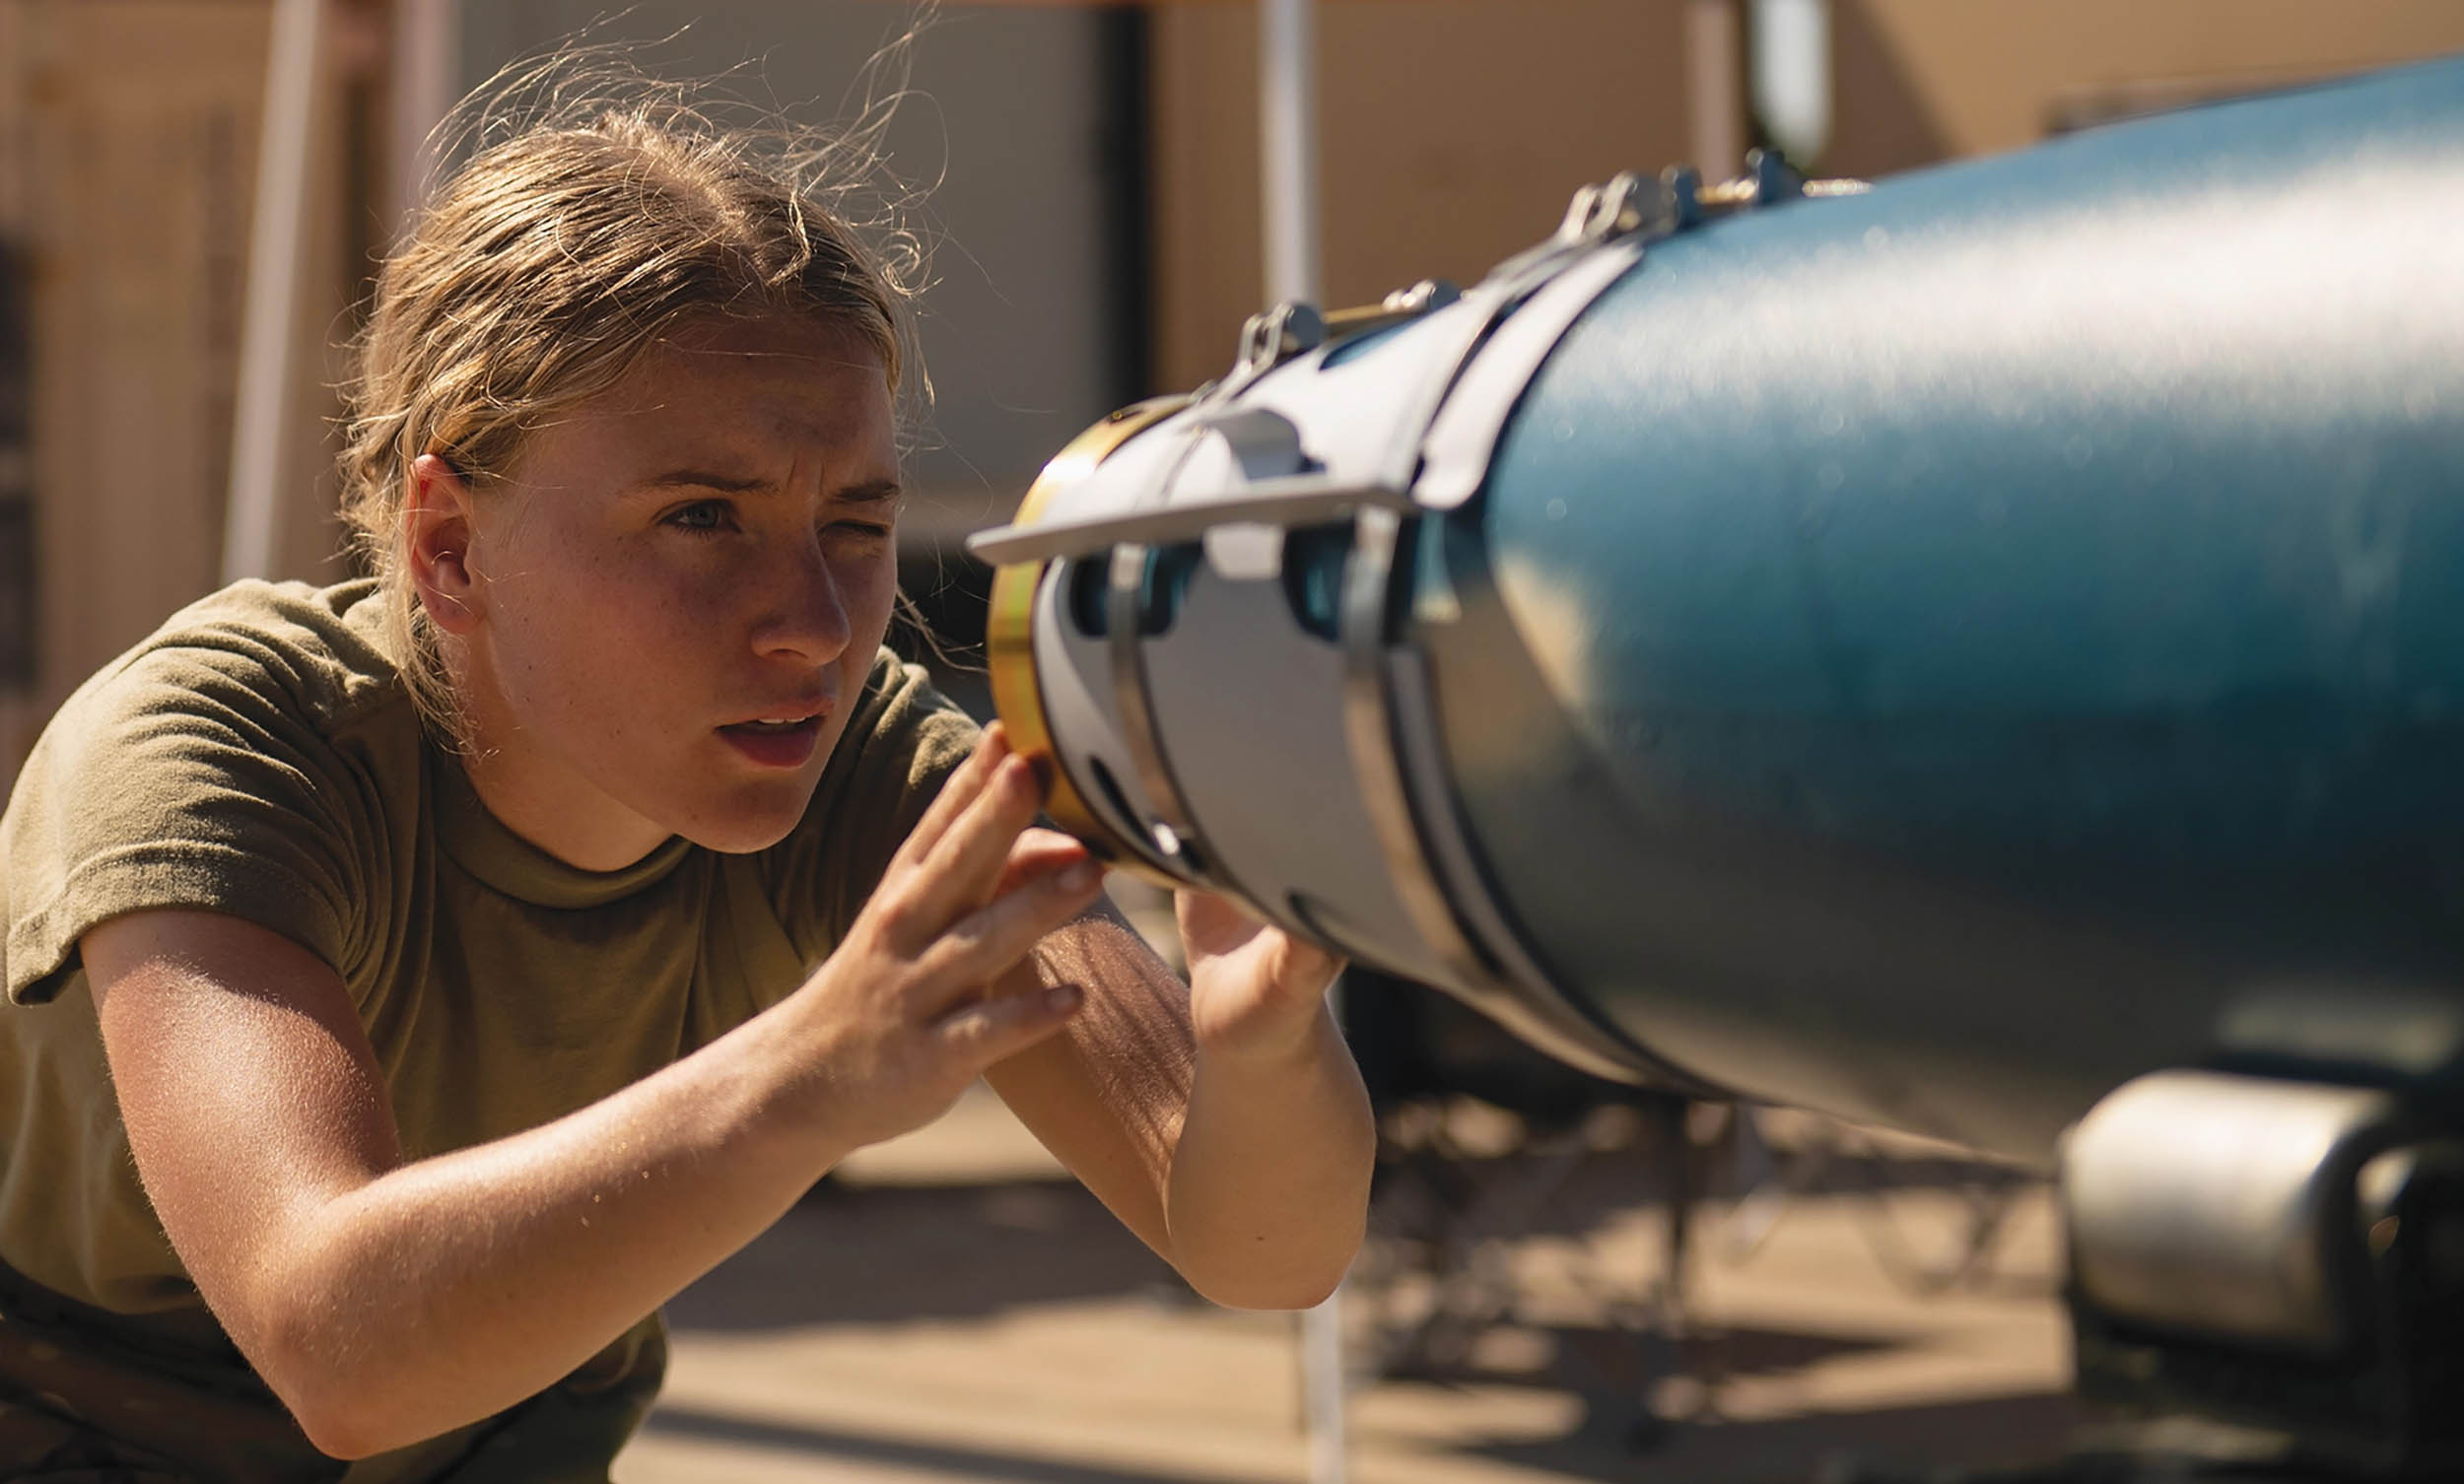 Air Force Senior Airman builds GBU-38 joint direct attack munitions during large-scale readiness exercise